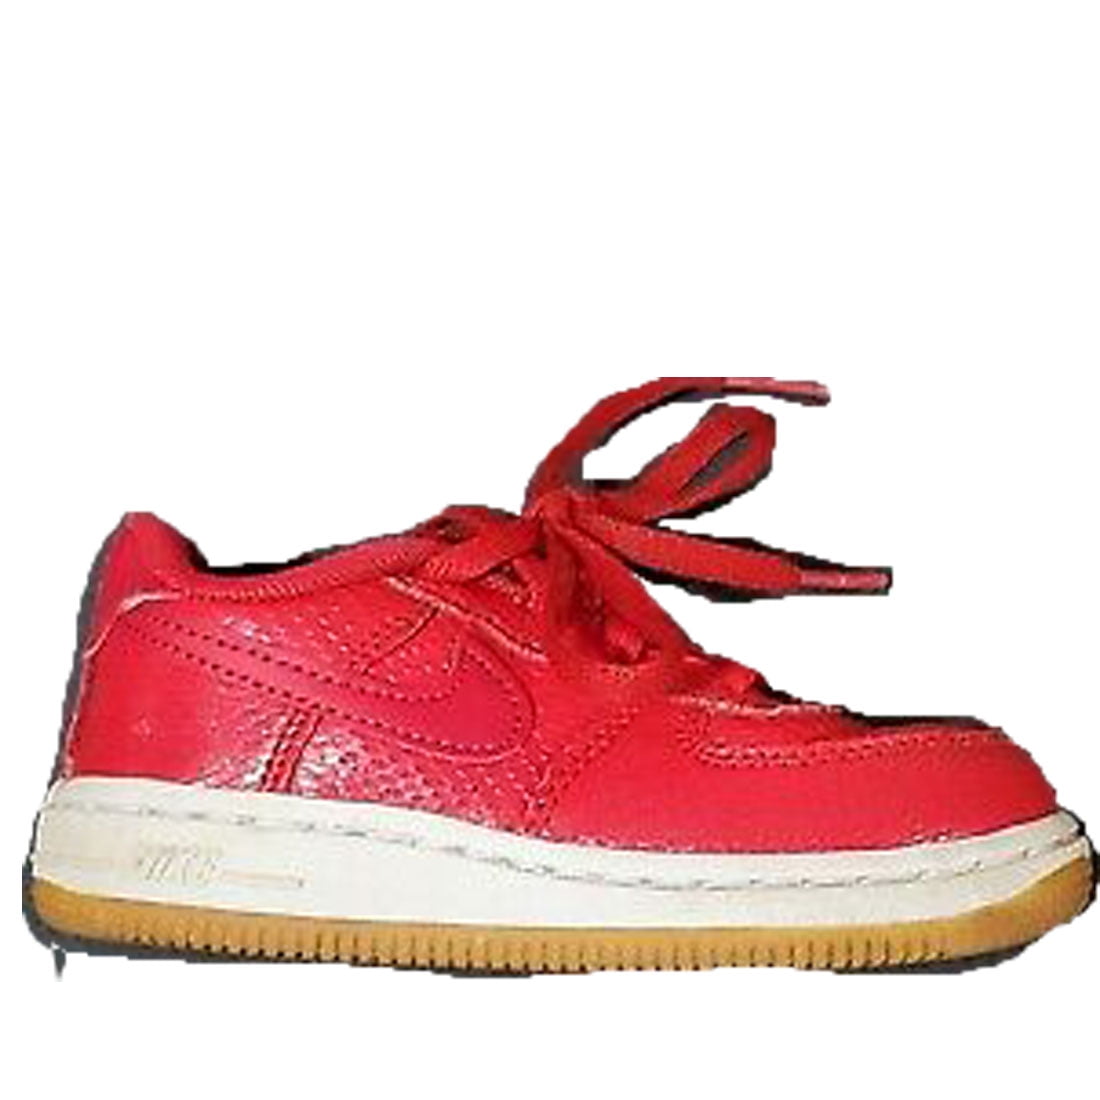 red air force 1